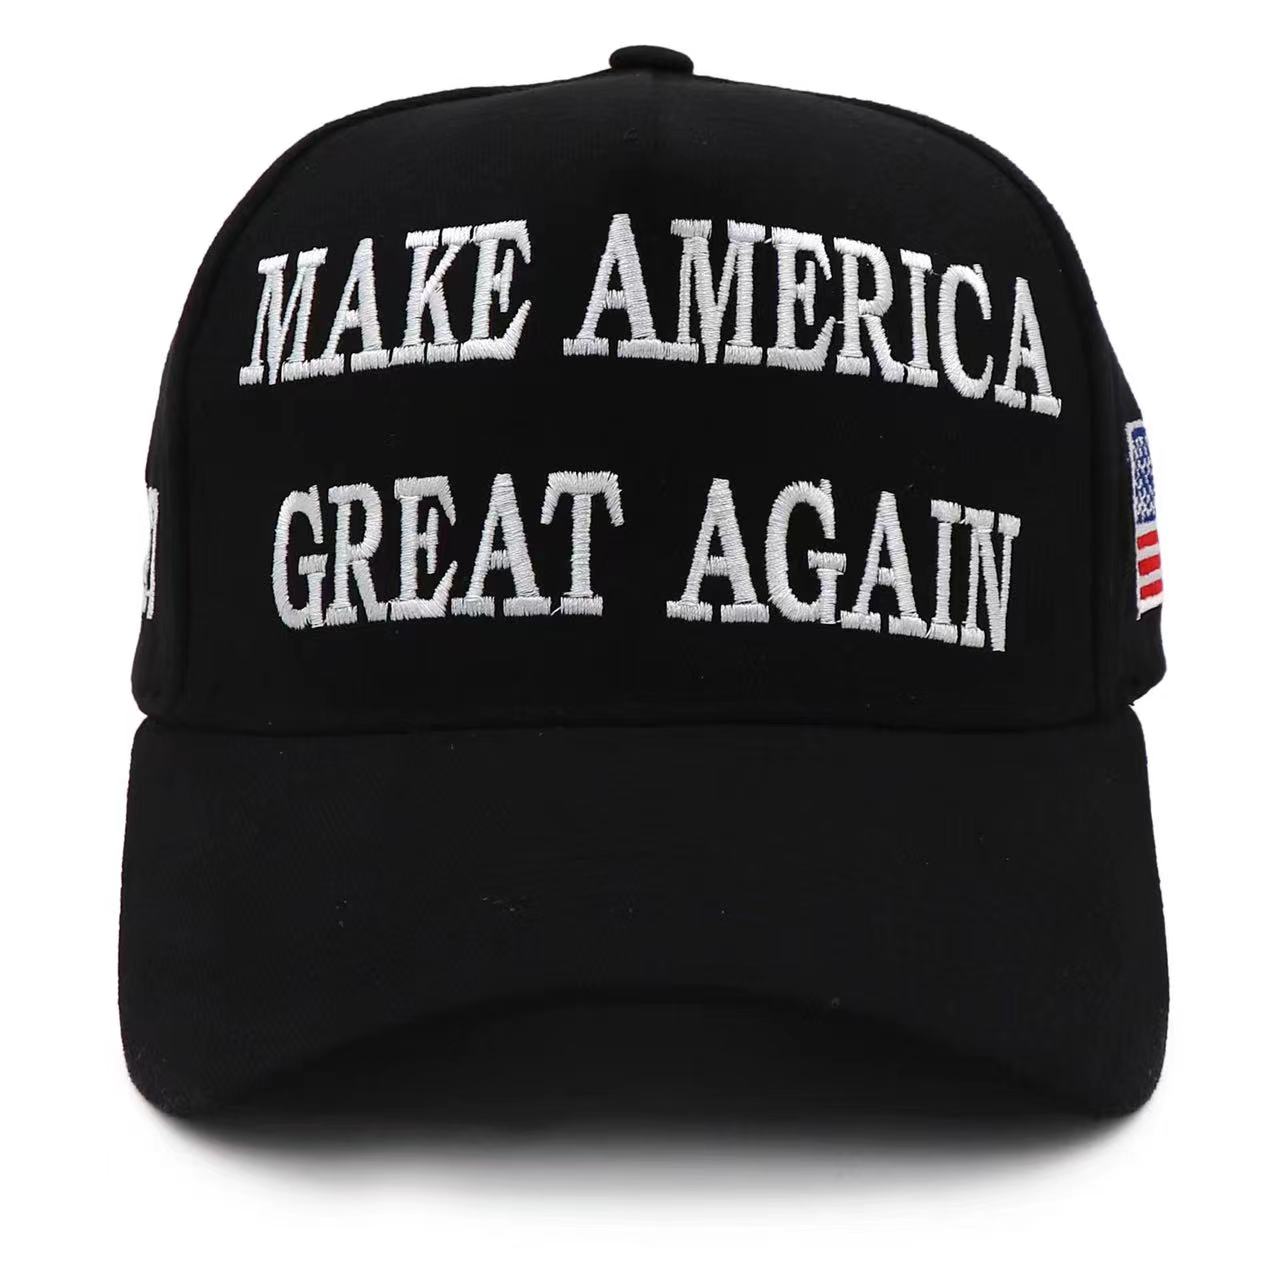 Trump Activity Party Hats Cotton Embroidery Basebal Cap Trump 45-47th Make America Great Again Sports HatDonald Trump 2024 Hats s Embroidery Presidential Election